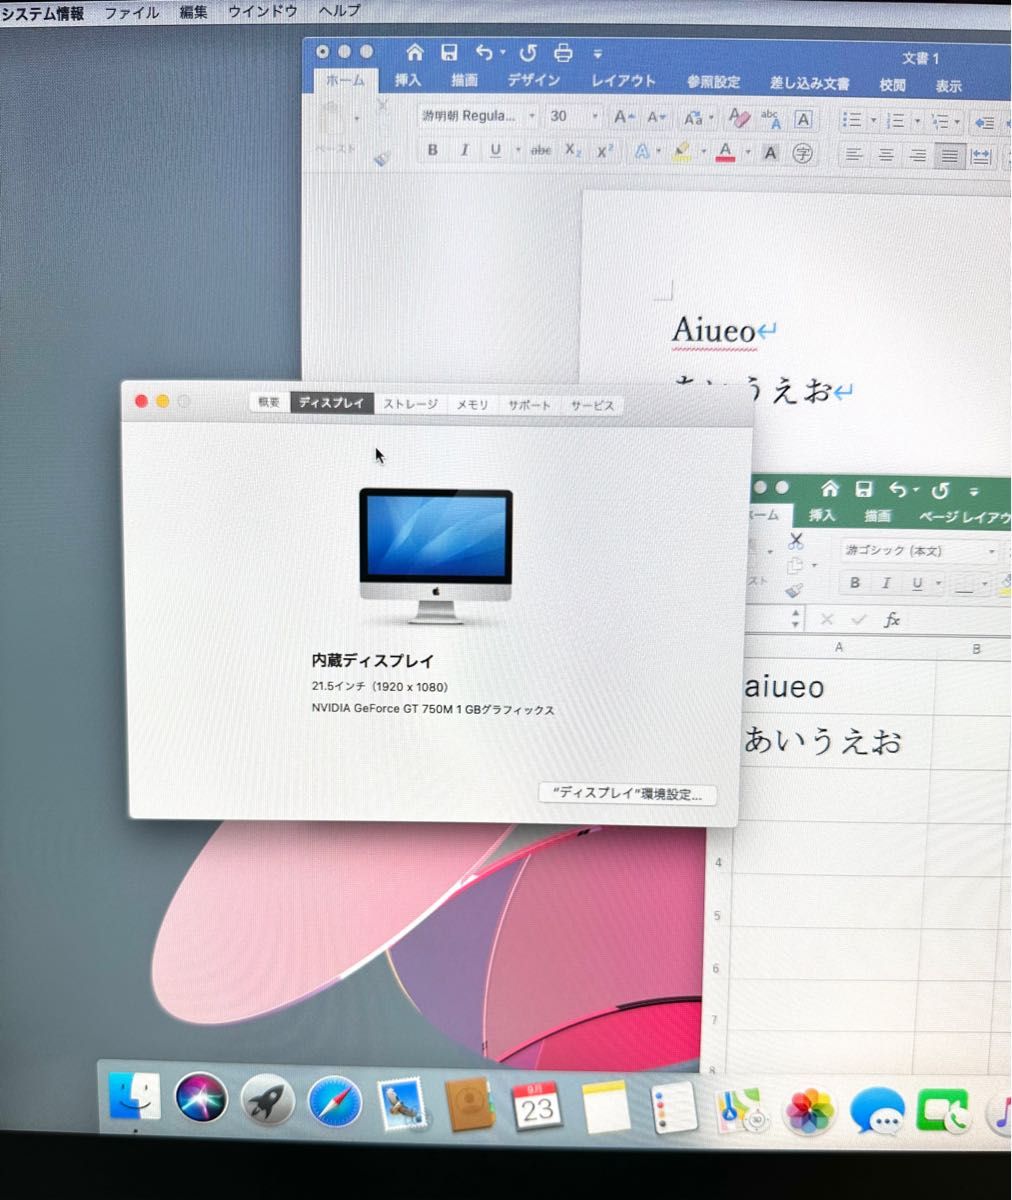 iMac 2013 ME086J/A MS Office有り(word excel powerpoint等)｜PayPay